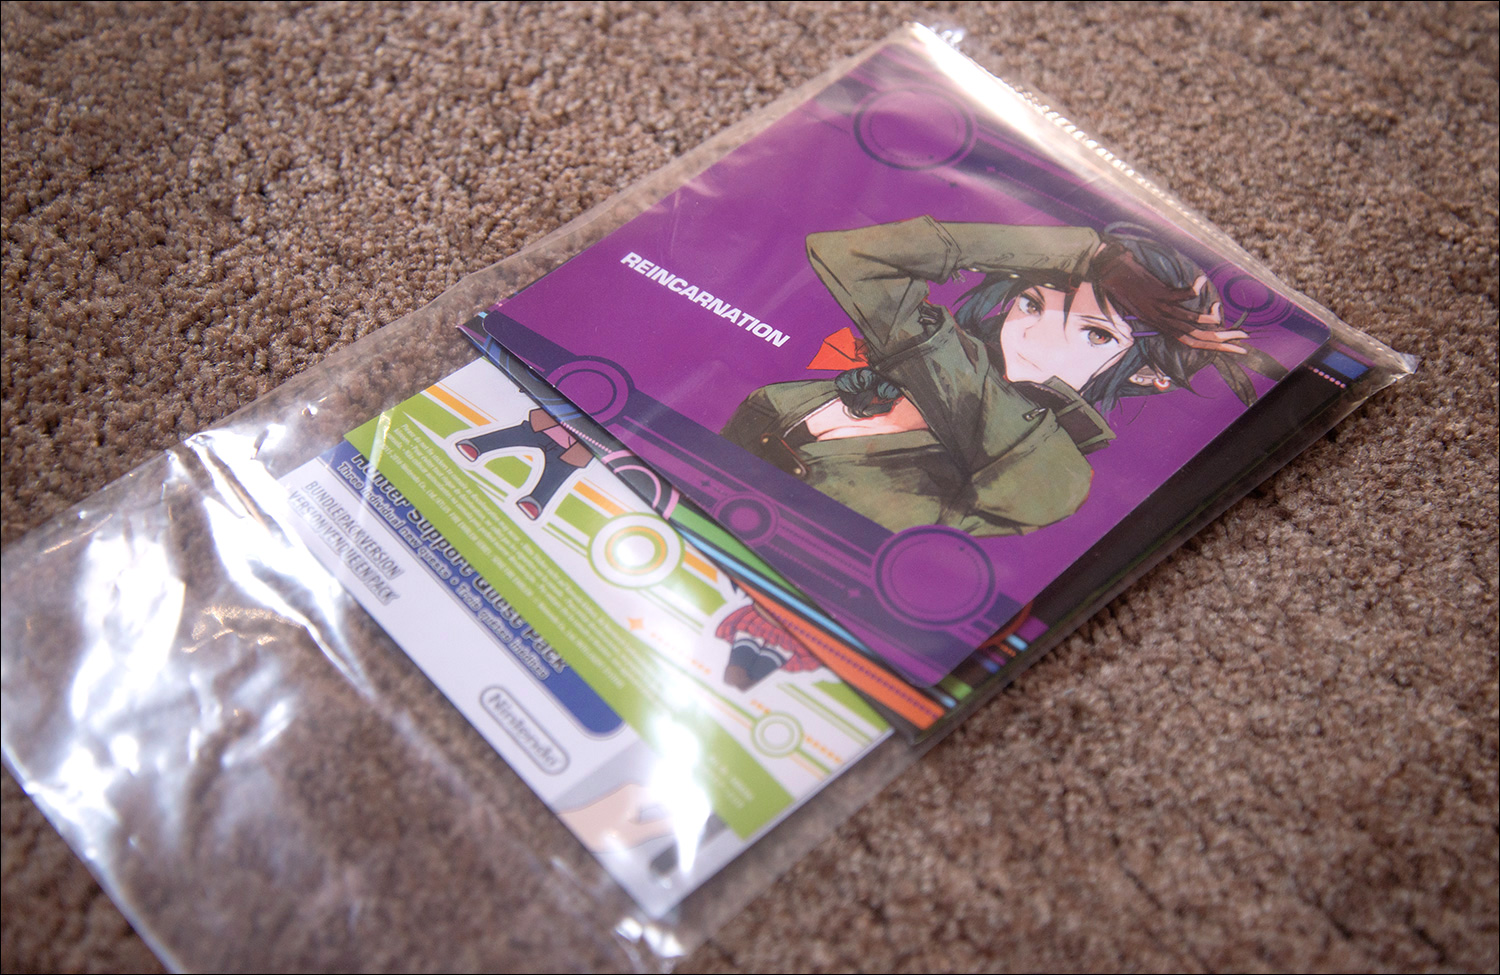 Tokyo-Mirage-Sessions-FE-Fortissimo-Edition-Bag